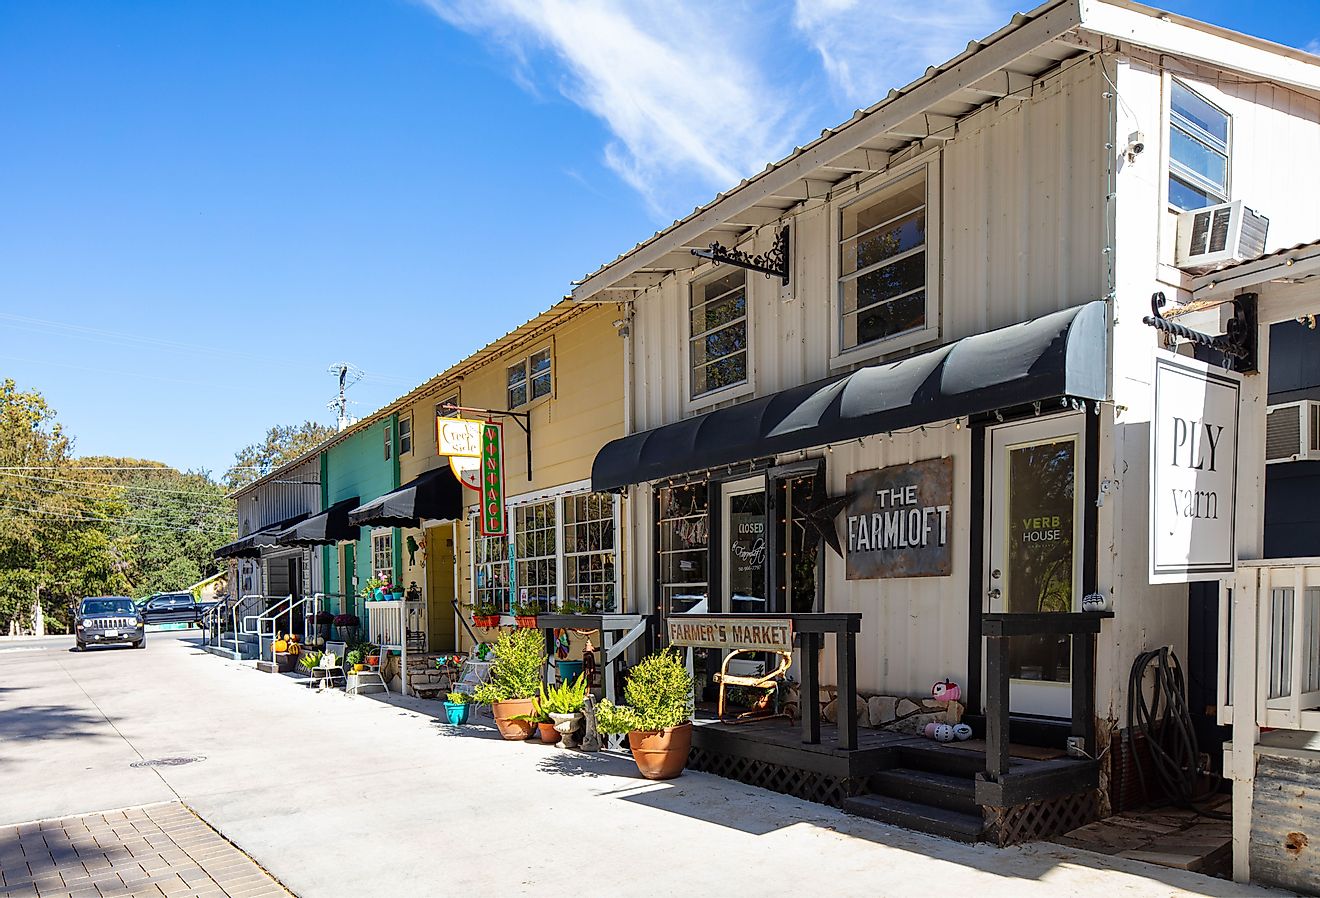 The small shops at Wimberley Square. Image credit Roberto Galan via Shutterstock.